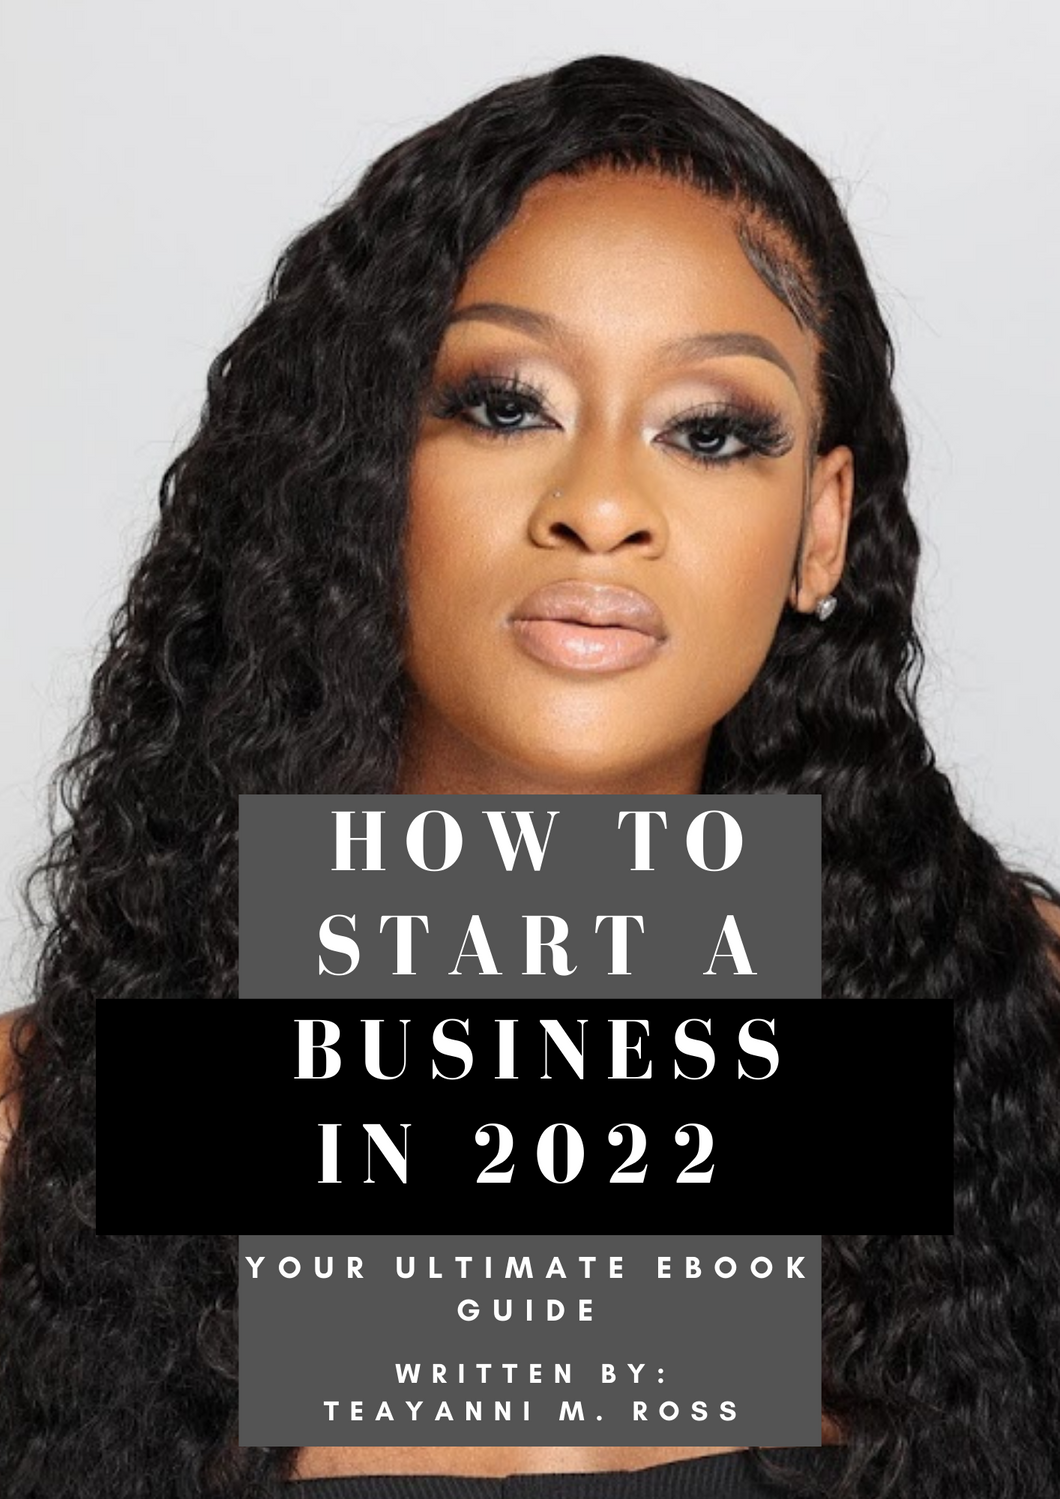 HOW TO START A BUSINESS E-BOOK GUIDE (Instant Download)